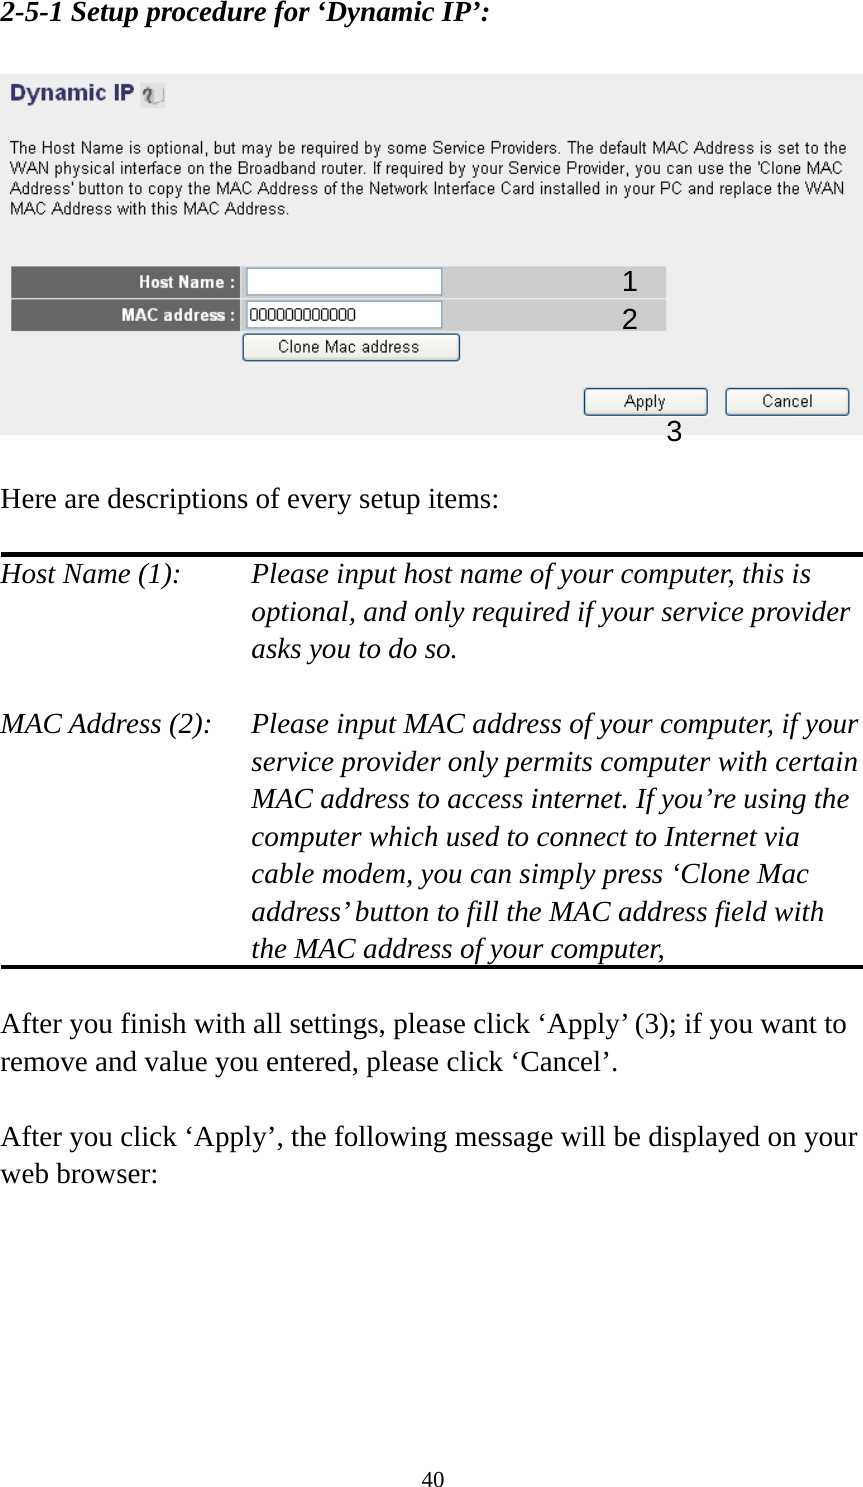 40 2-5-1 Setup procedure for ‘Dynamic IP’:    Here are descriptions of every setup items:  Host Name (1):    Please input host name of your computer, this is optional, and only required if your service provider asks you to do so.    MAC Address (2):    Please input MAC address of your computer, if your service provider only permits computer with certain MAC address to access internet. If you’re using the computer which used to connect to Internet via cable modem, you can simply press ‘Clone Mac address’ button to fill the MAC address field with the MAC address of your computer,   After you finish with all settings, please click ‘Apply’ (3); if you want to remove and value you entered, please click ‘Cancel’.  After you click ‘Apply’, the following message will be displayed on your web browser:  1 2 3 